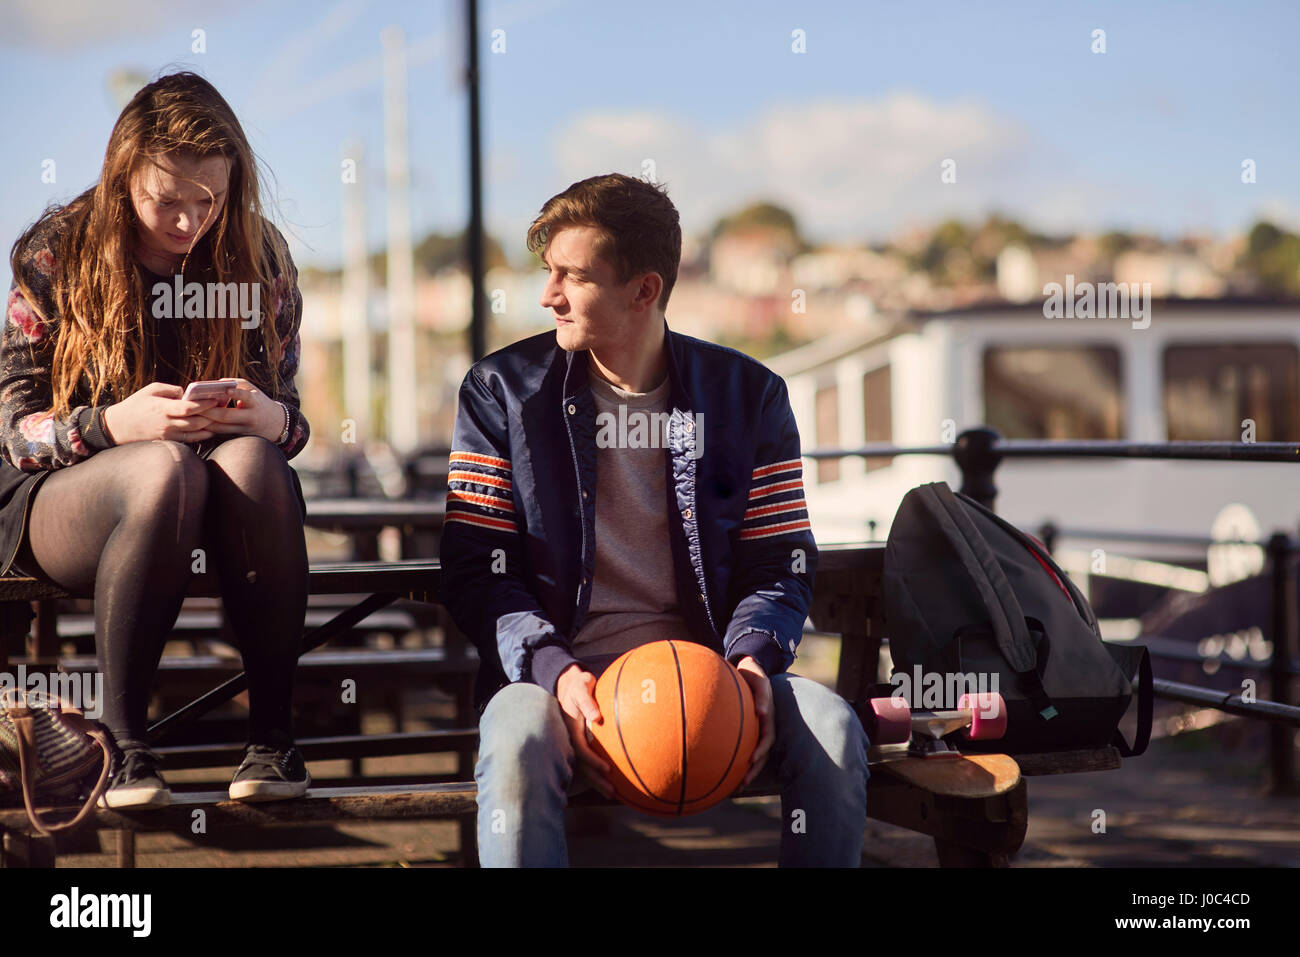 Two friends sitting outdoors, young man holding basketball, young woman using smartphone, Bristol, UK Stock Photo